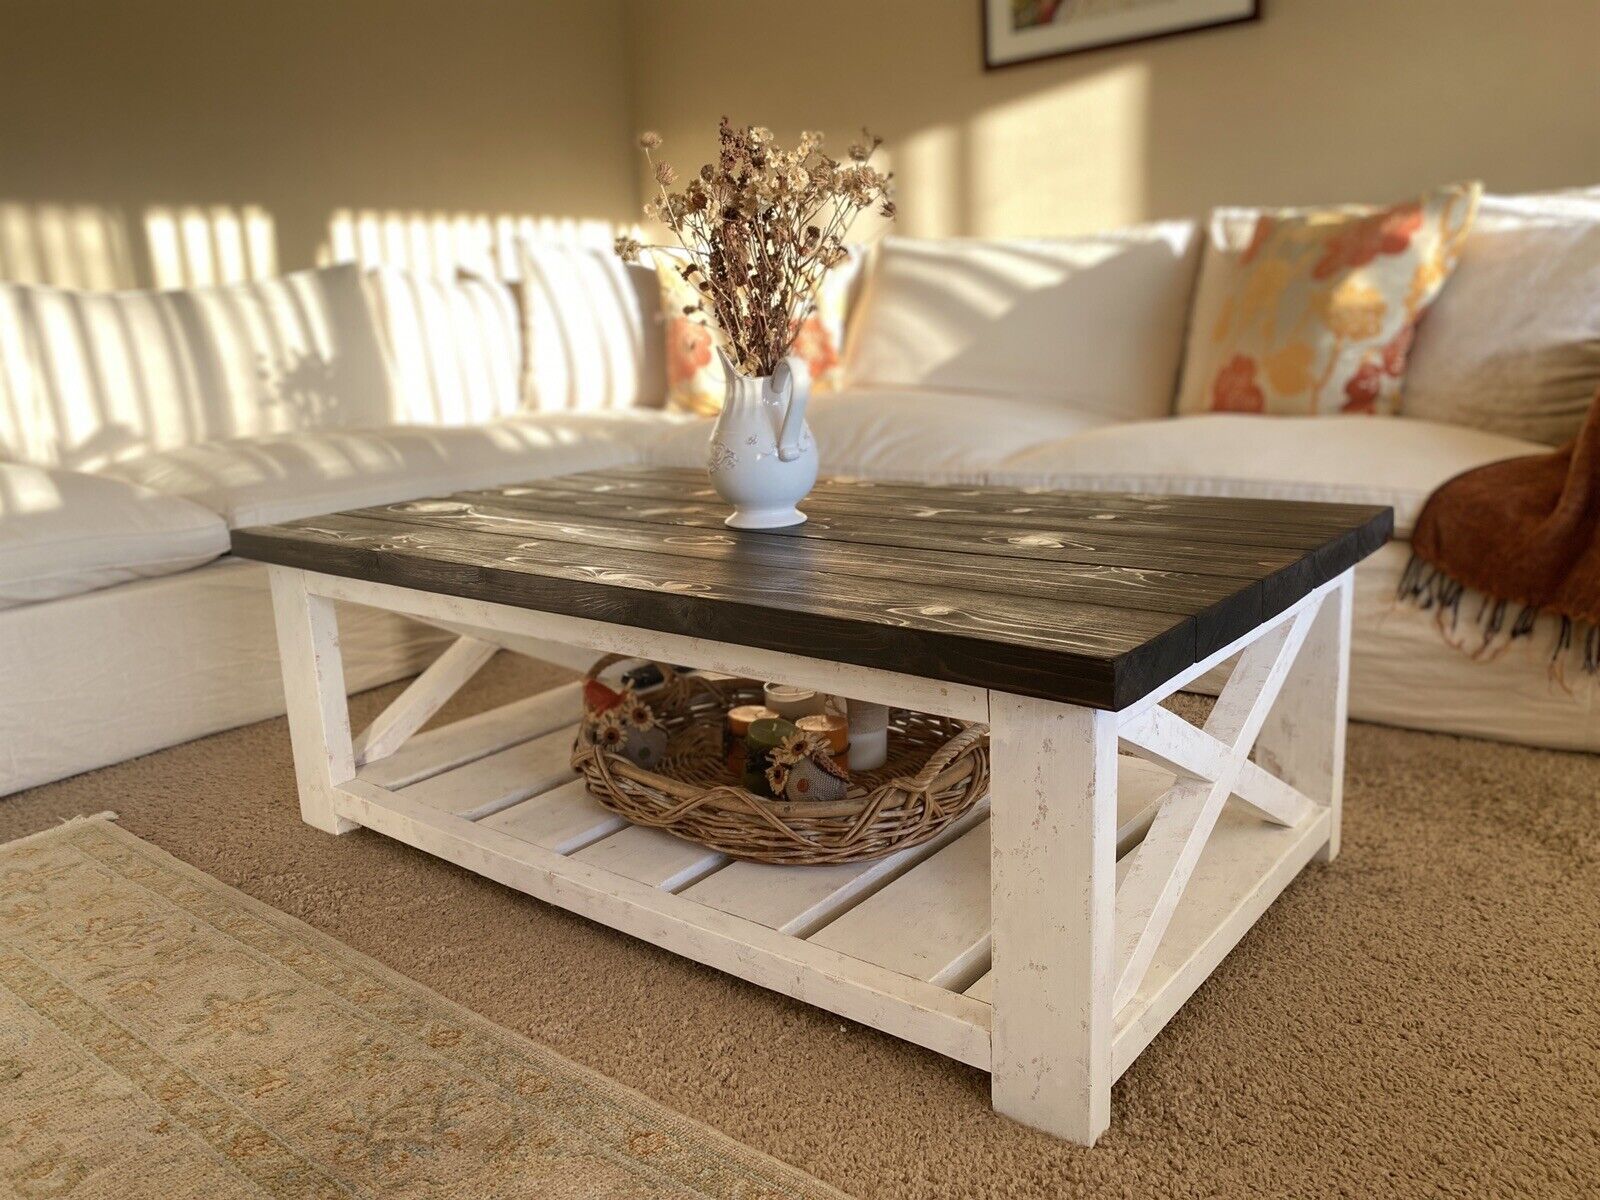 Farm Style Coffee Table Redwood & Pine | Ebay Inside Farmhouse Style Coffee Tables (View 2 of 15)